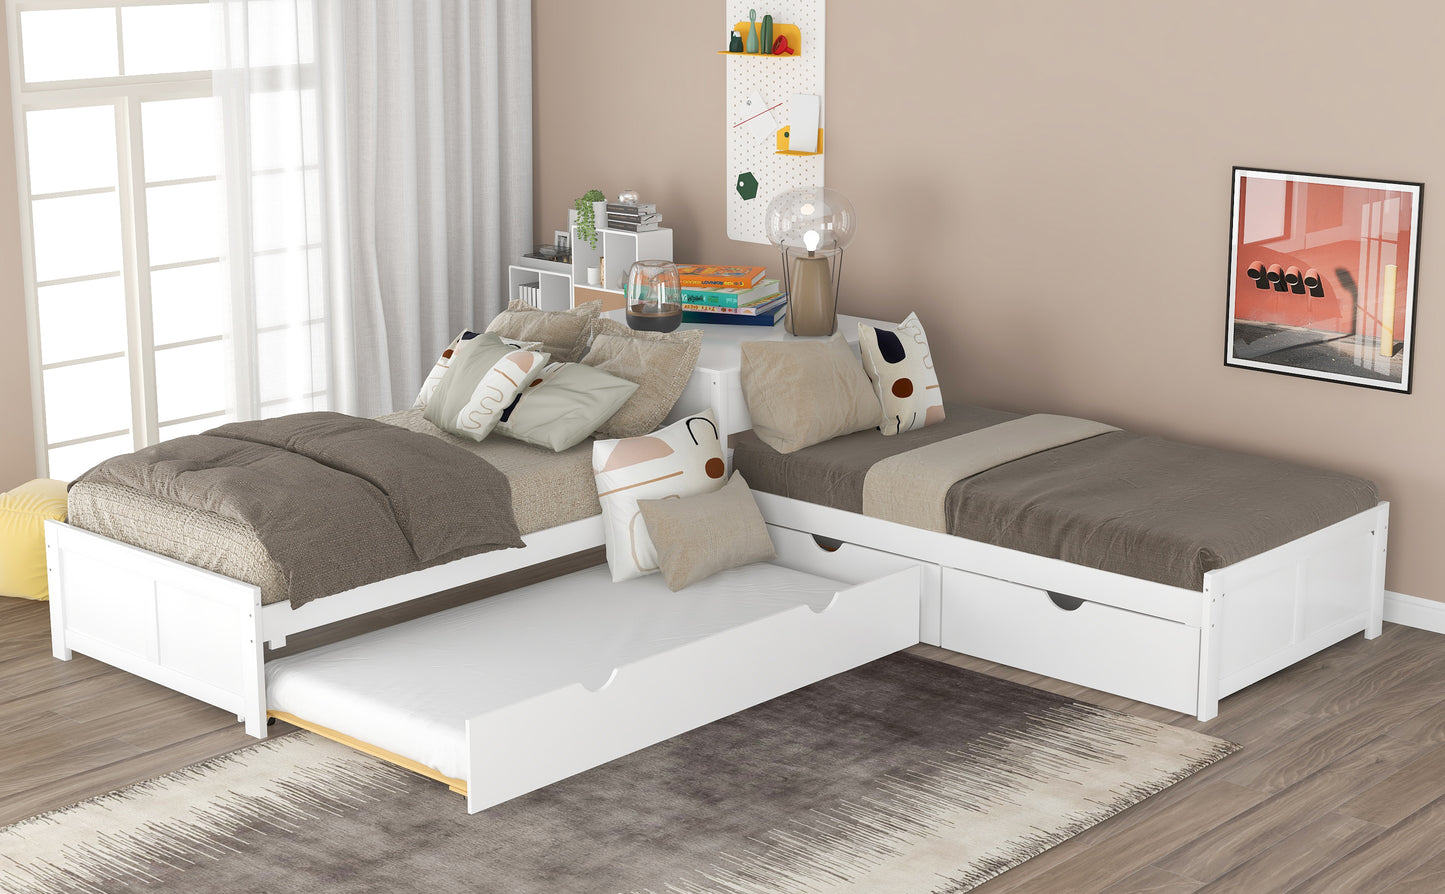 L-shaped Platform Bed with Trundle and Drawers Linked with built-in Desk,Twin,White